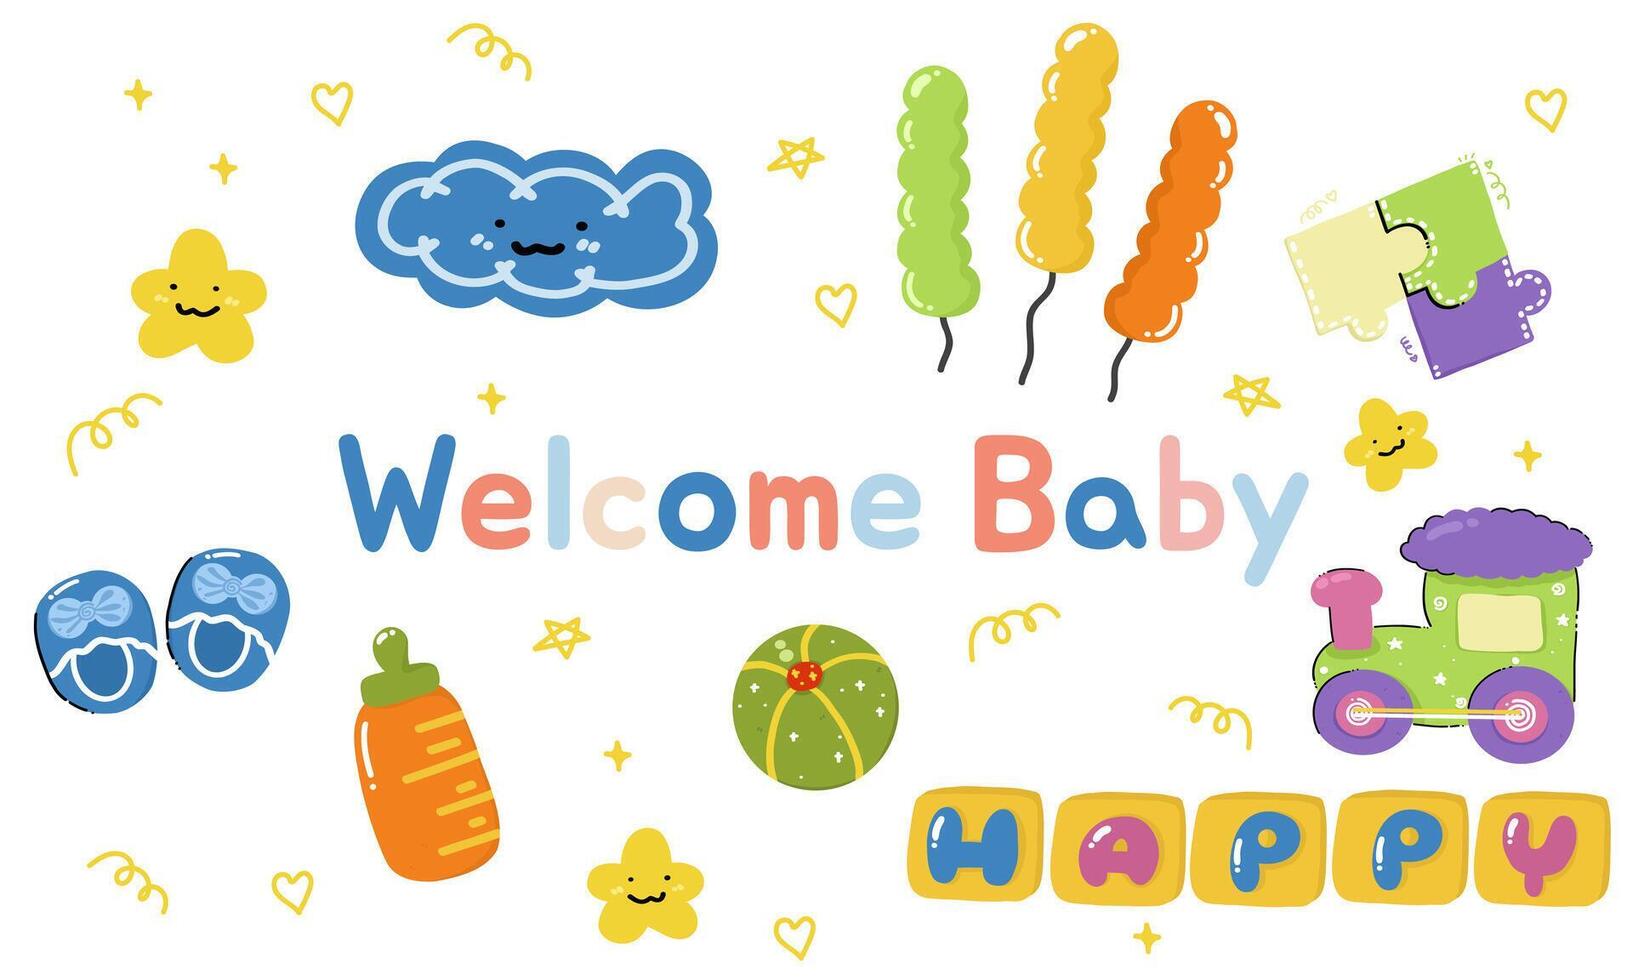 Welcome greeting card for childbirth with adorable baby accessories, welcome the little one into the family. vector